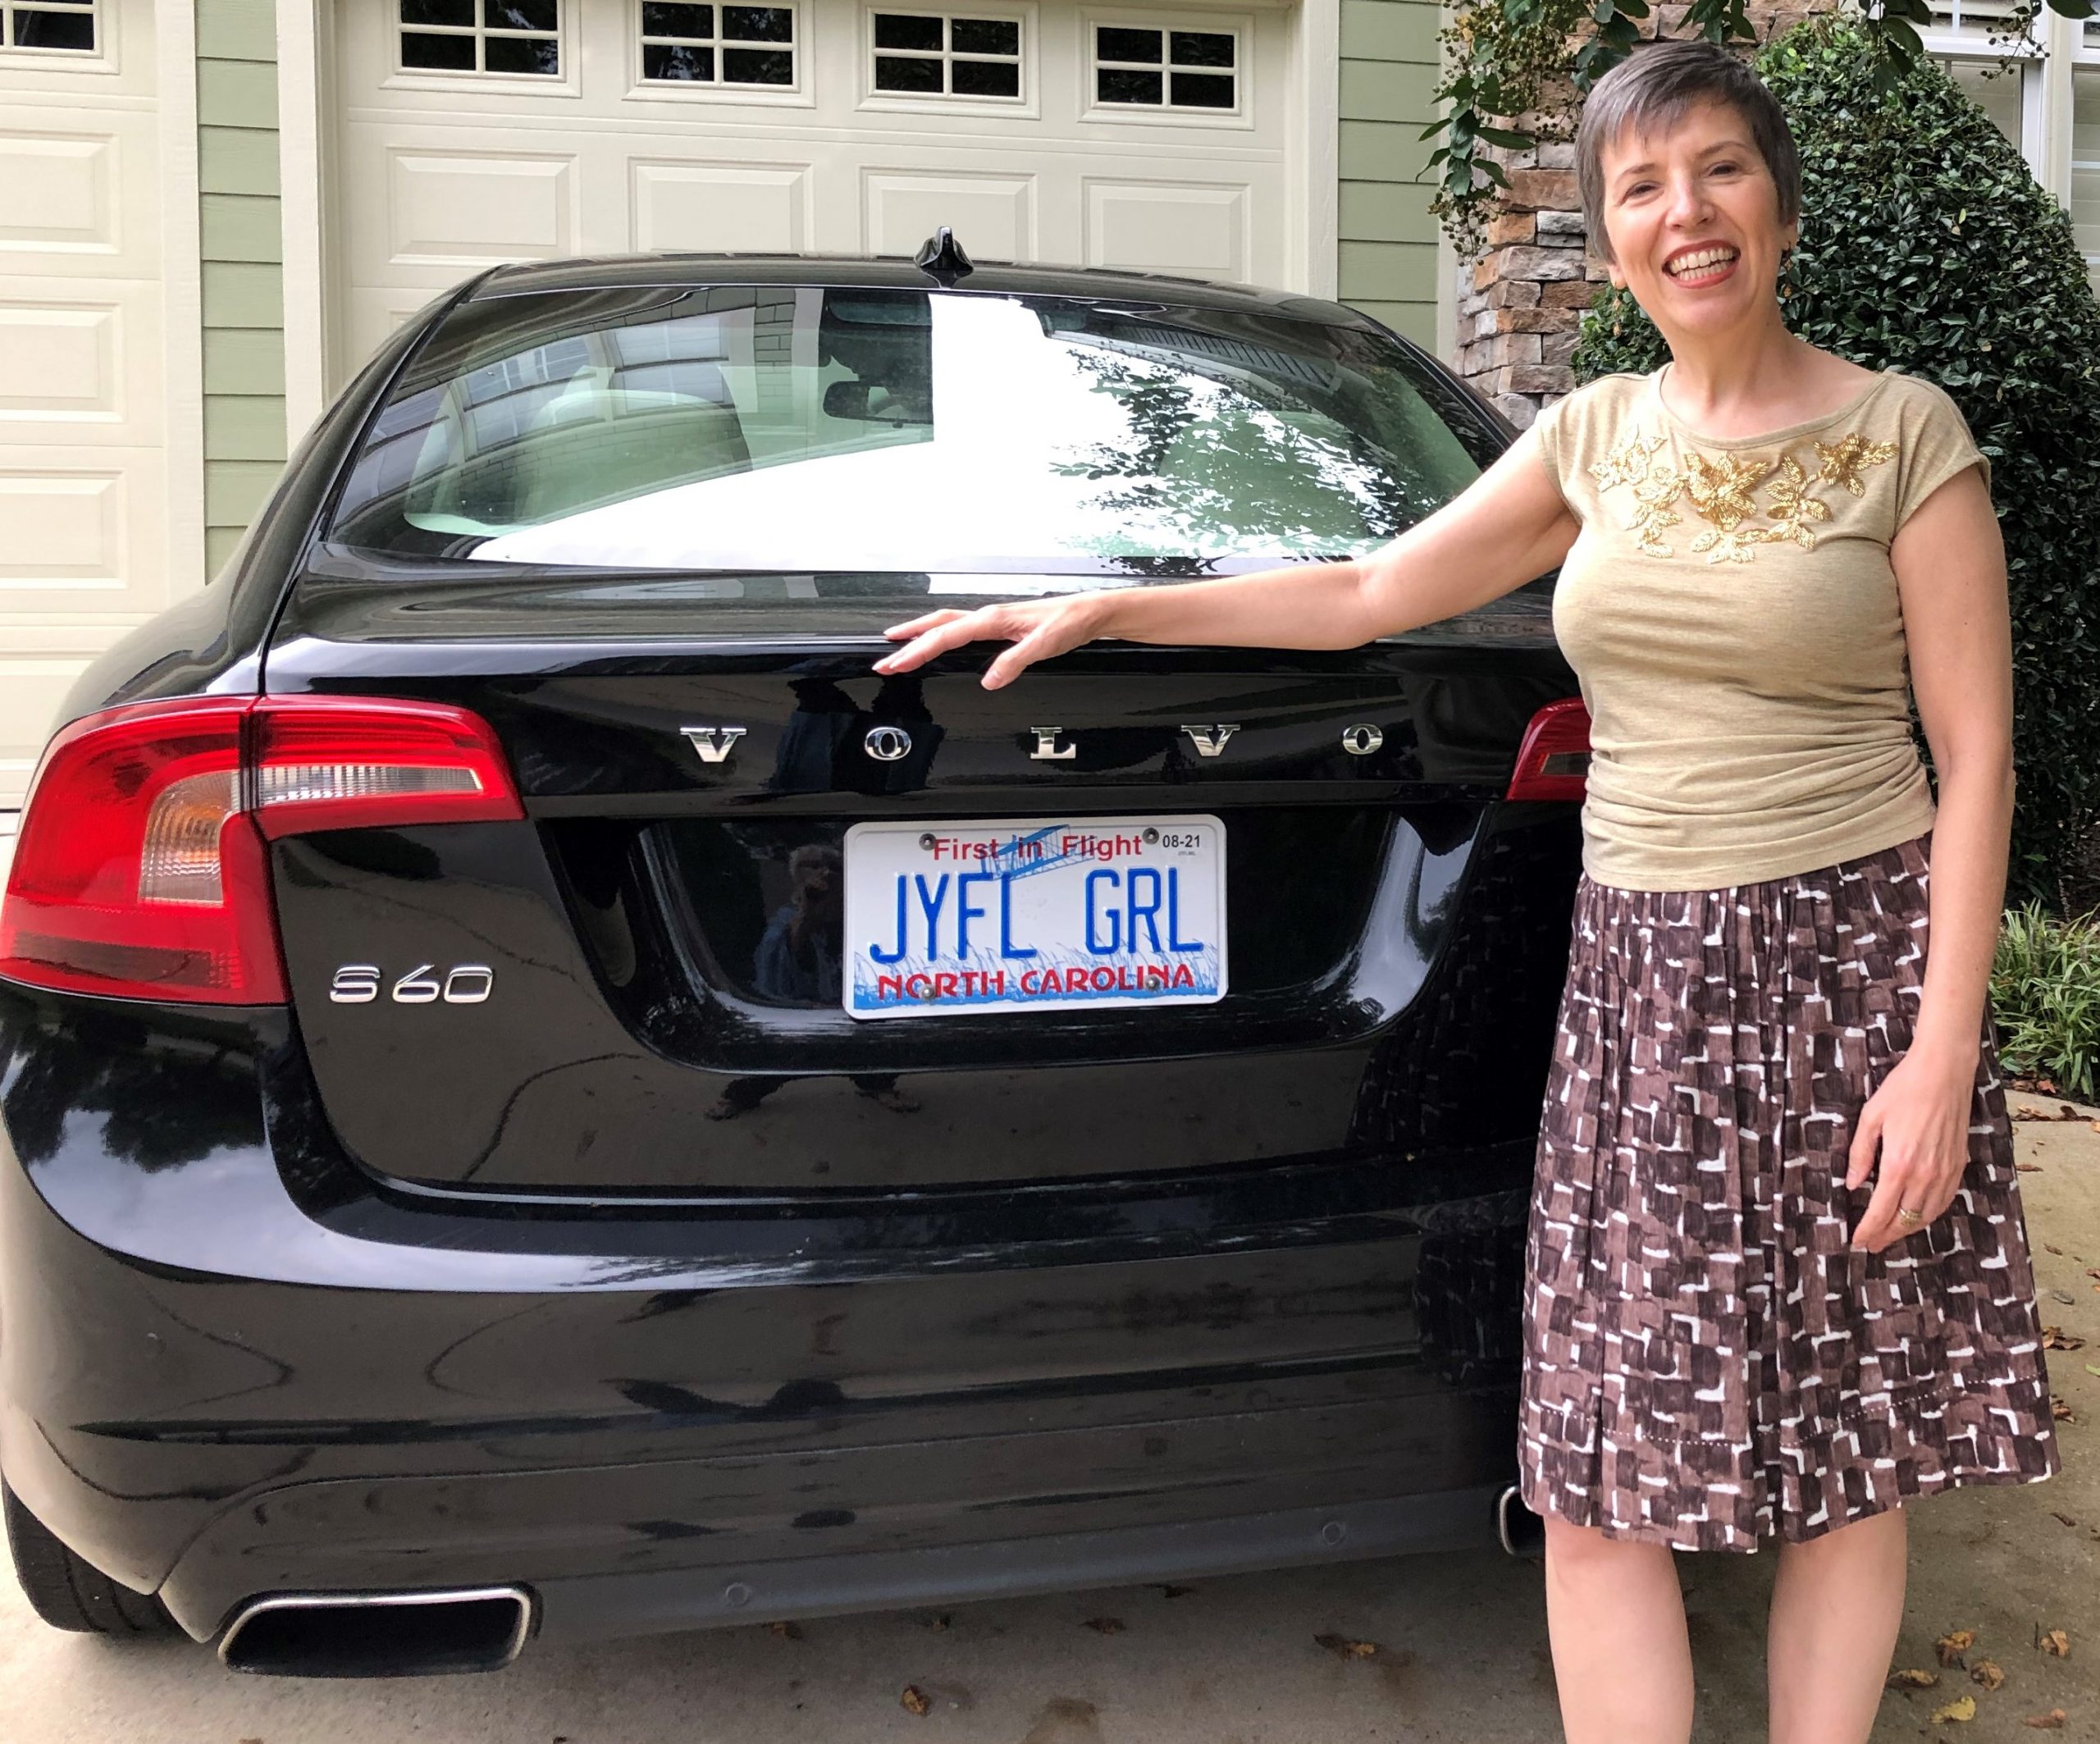 Marcy with Joyful Girl license plate